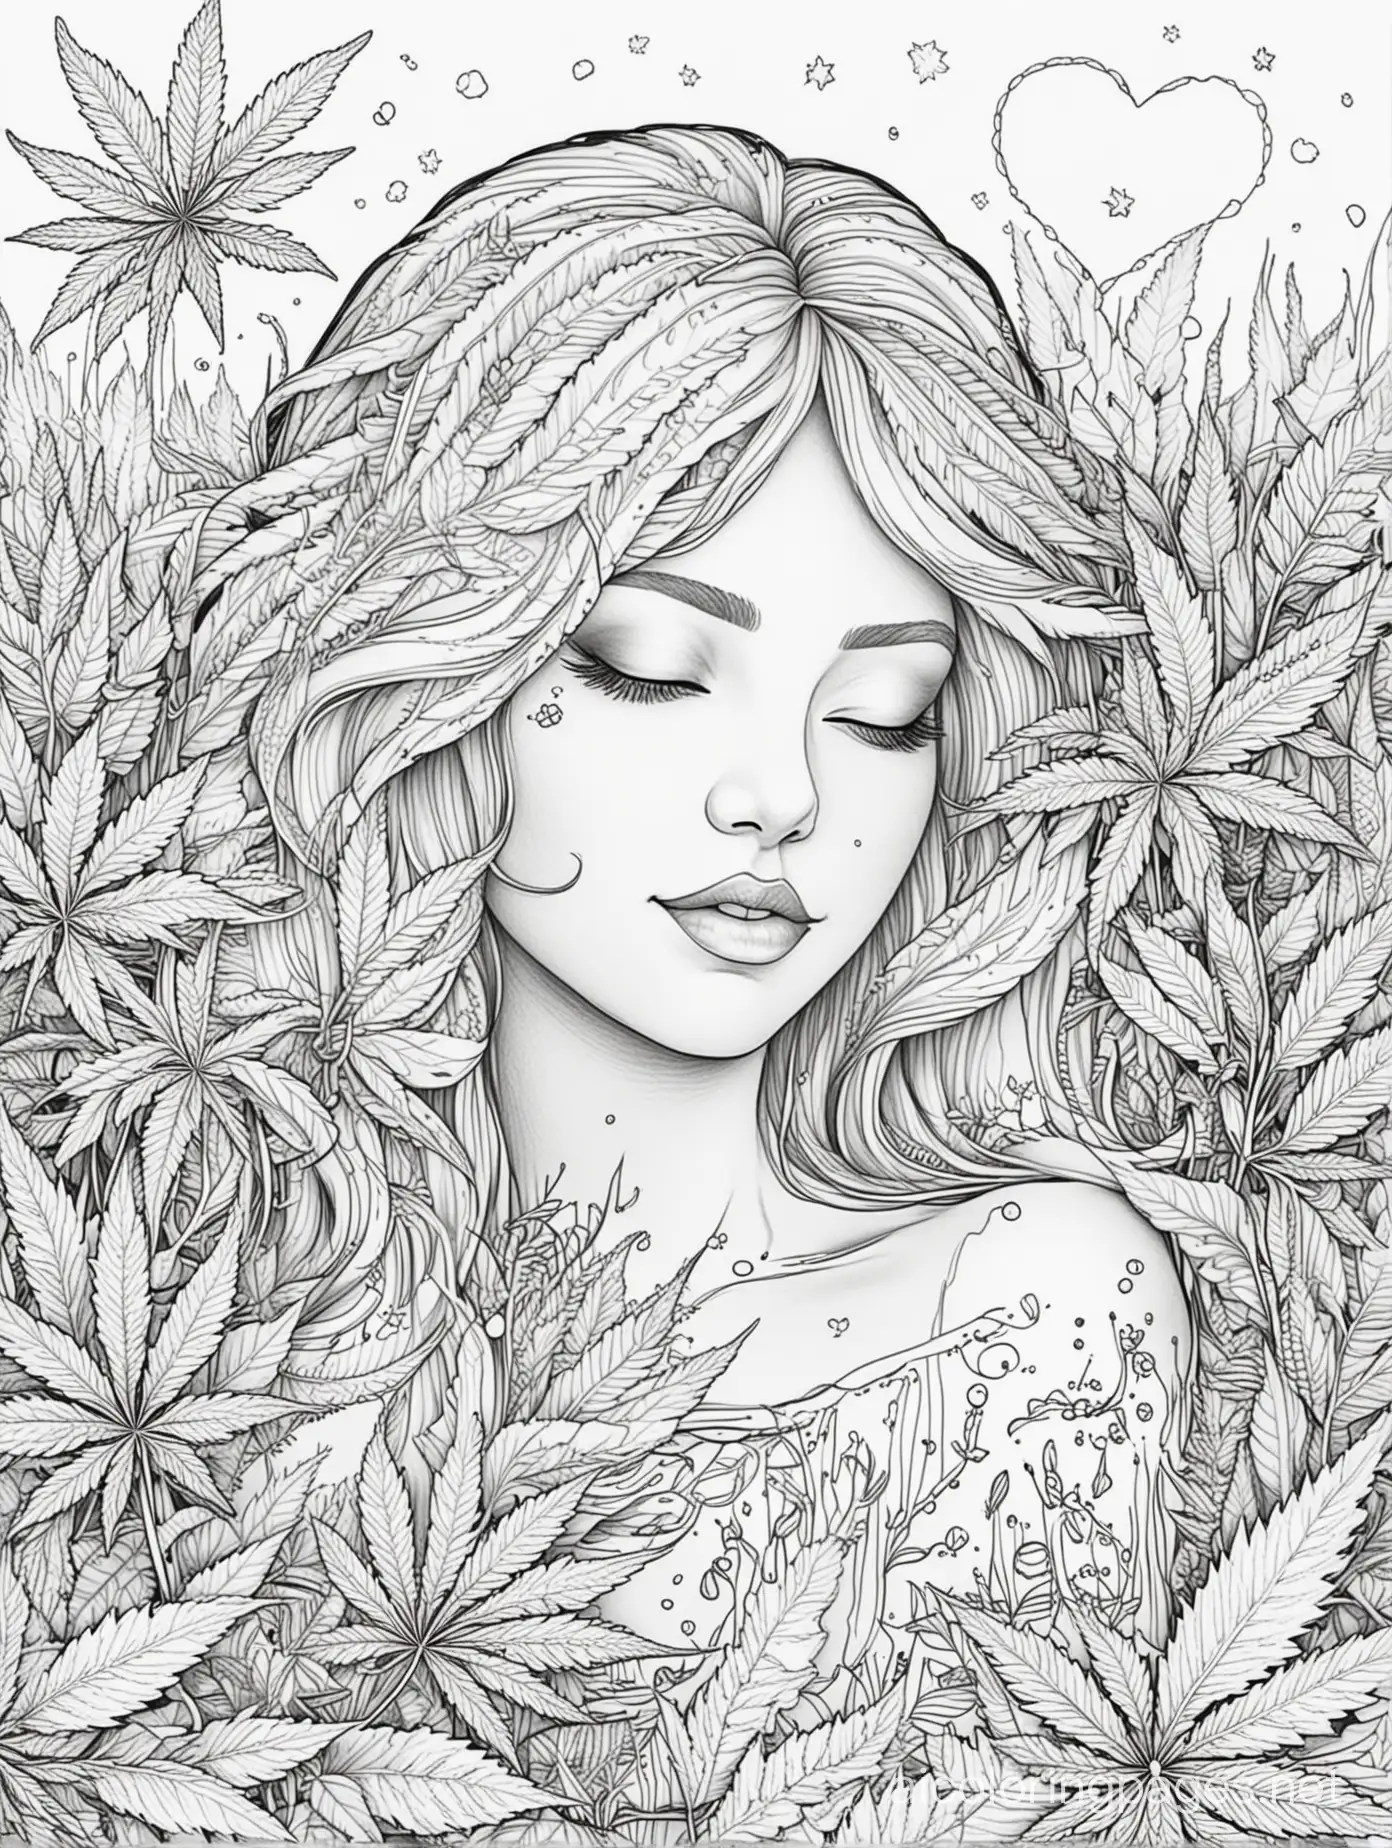 Marijuana-Love-Fantasy-Dream-Coloring-Page-for-Kids-Simple-Black-and-White-Line-Art-on-White-Background